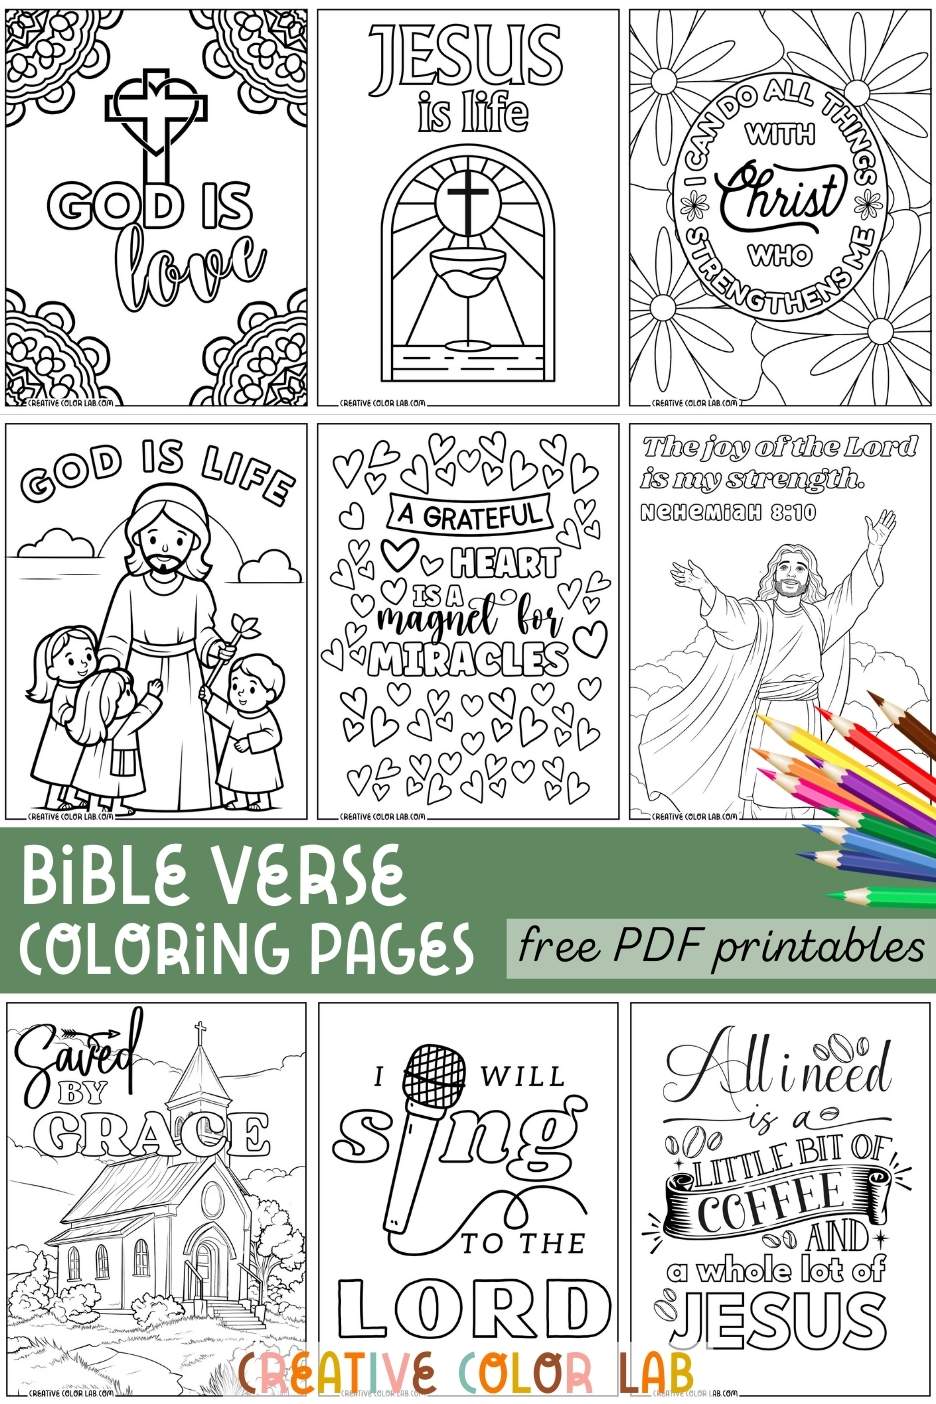 Collection of free bible verse coloring pages to download.